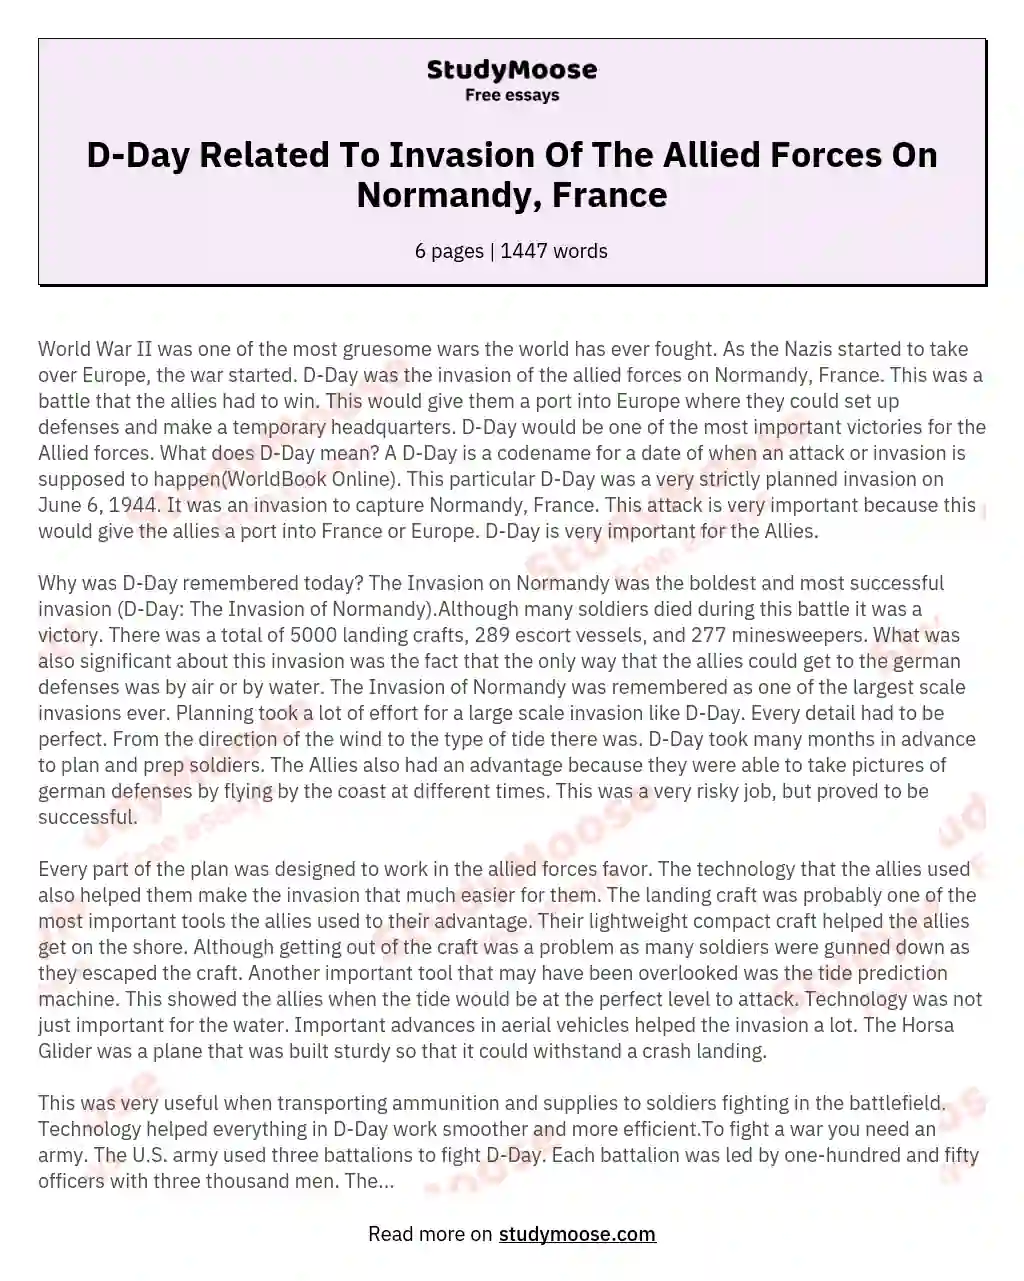 D-Day Related To Invasion Of The Allied Forces On Normandy, France essay